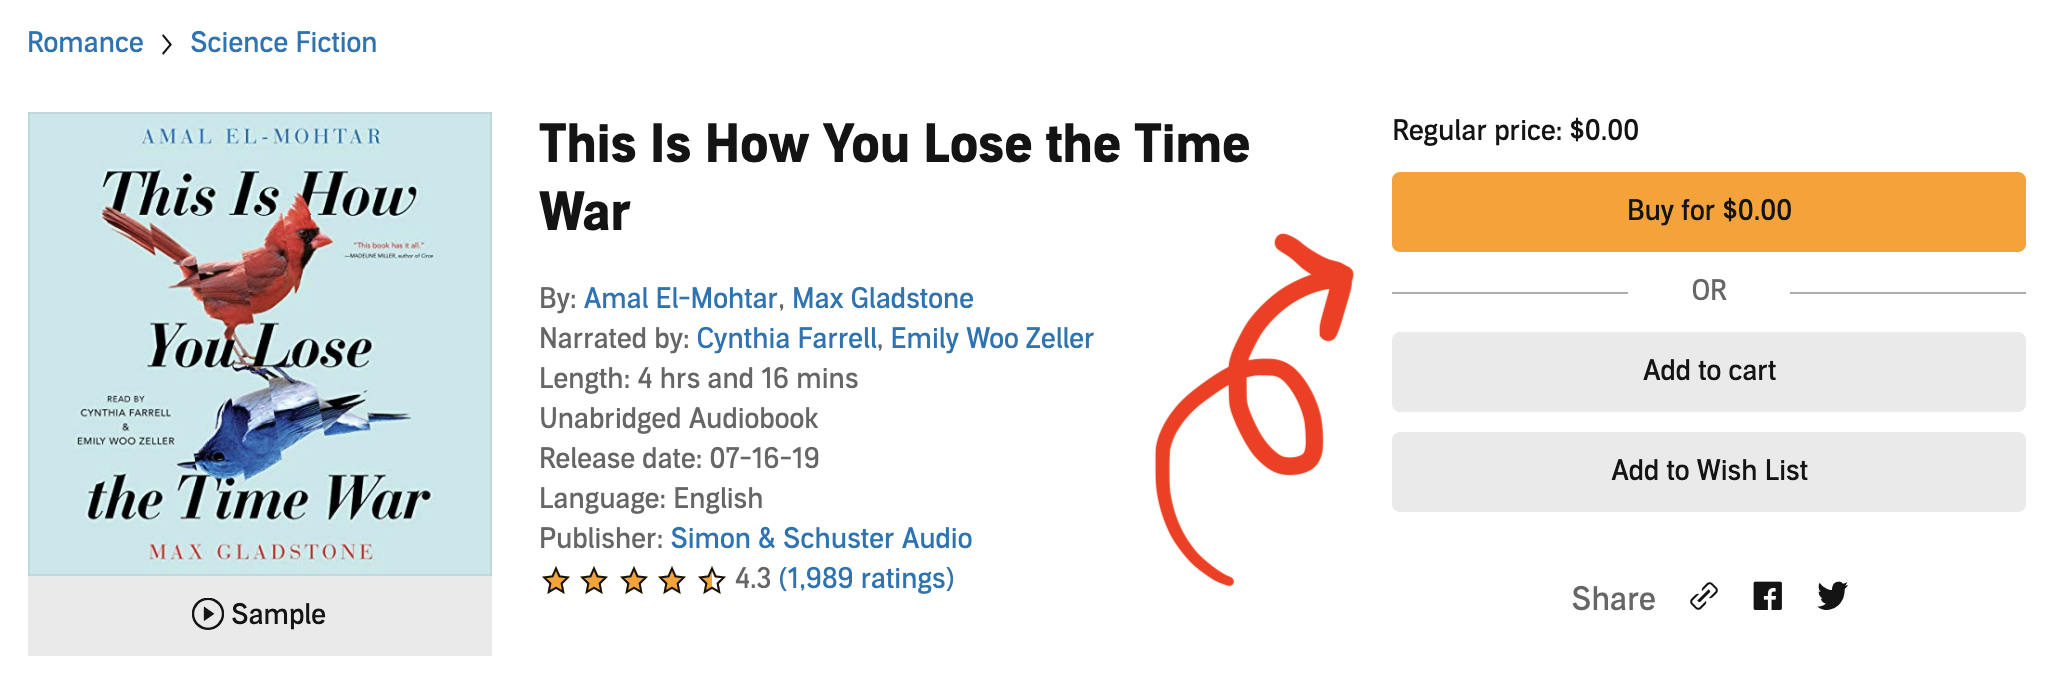 A picture of the product detail page of an Audible audiobook. A red arrow points to the buybox, a section to the left of the screen that lists all options available to the user: 'Buy for $0.00', 'Add to Cart','Add to Wish List', etc.